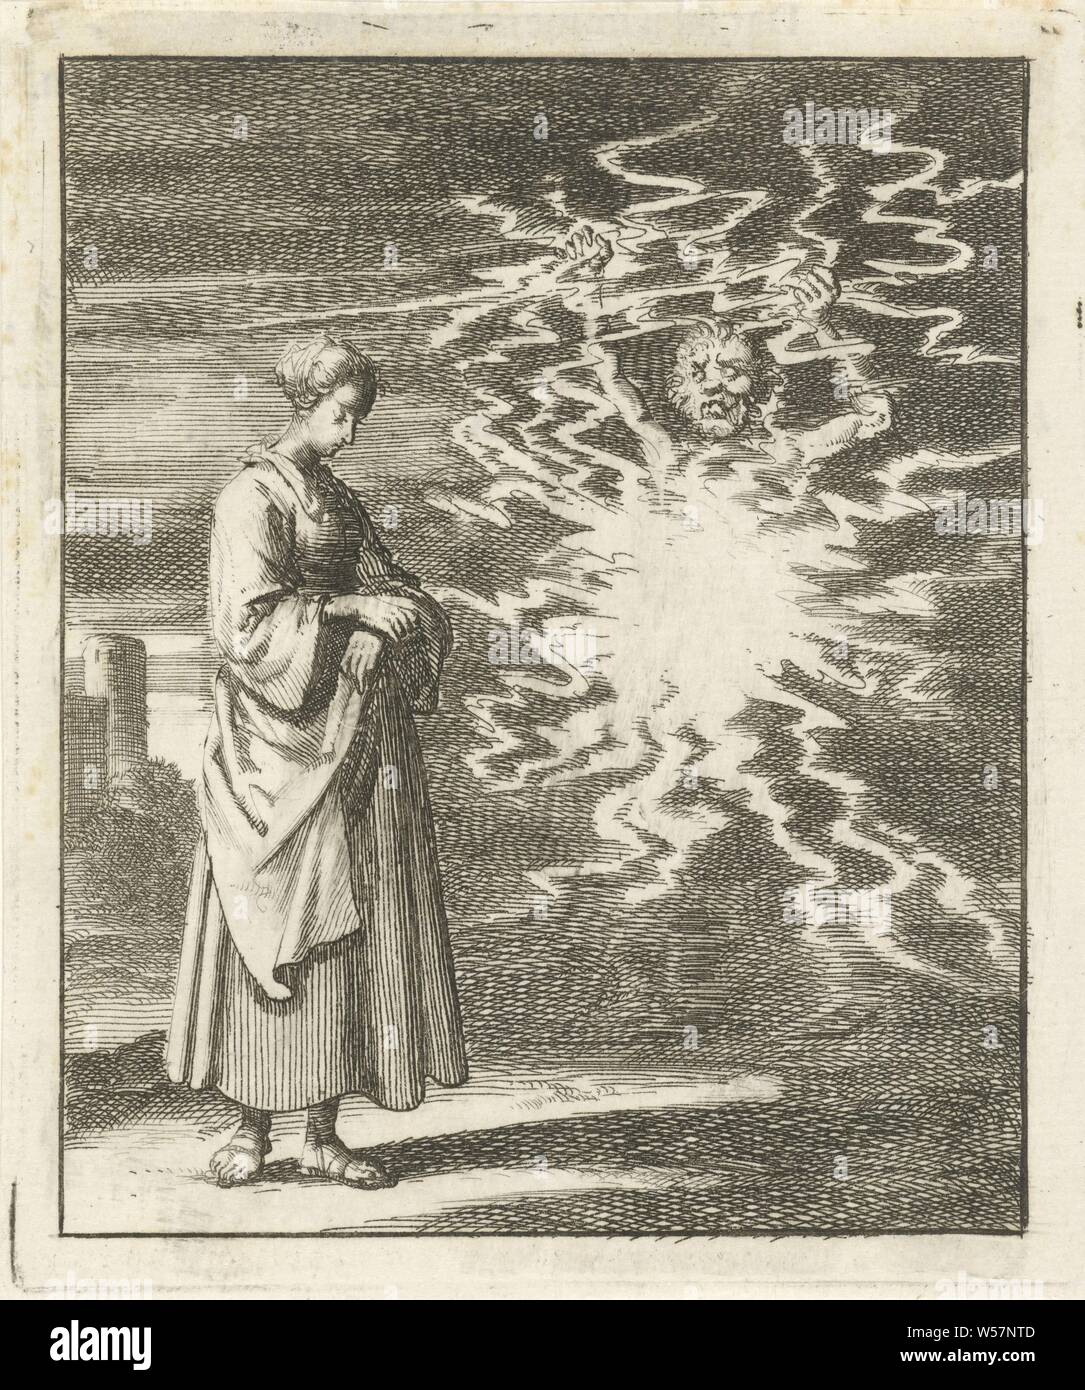 Woman walks quietly past the flames of Satan For fire and gloet, Is water good, devil (s) and demons: Satan, Jan Luyken, Amsterdam, 1687, paper, letterpress printing, h 92 mm × w 81 mm Stock Photo